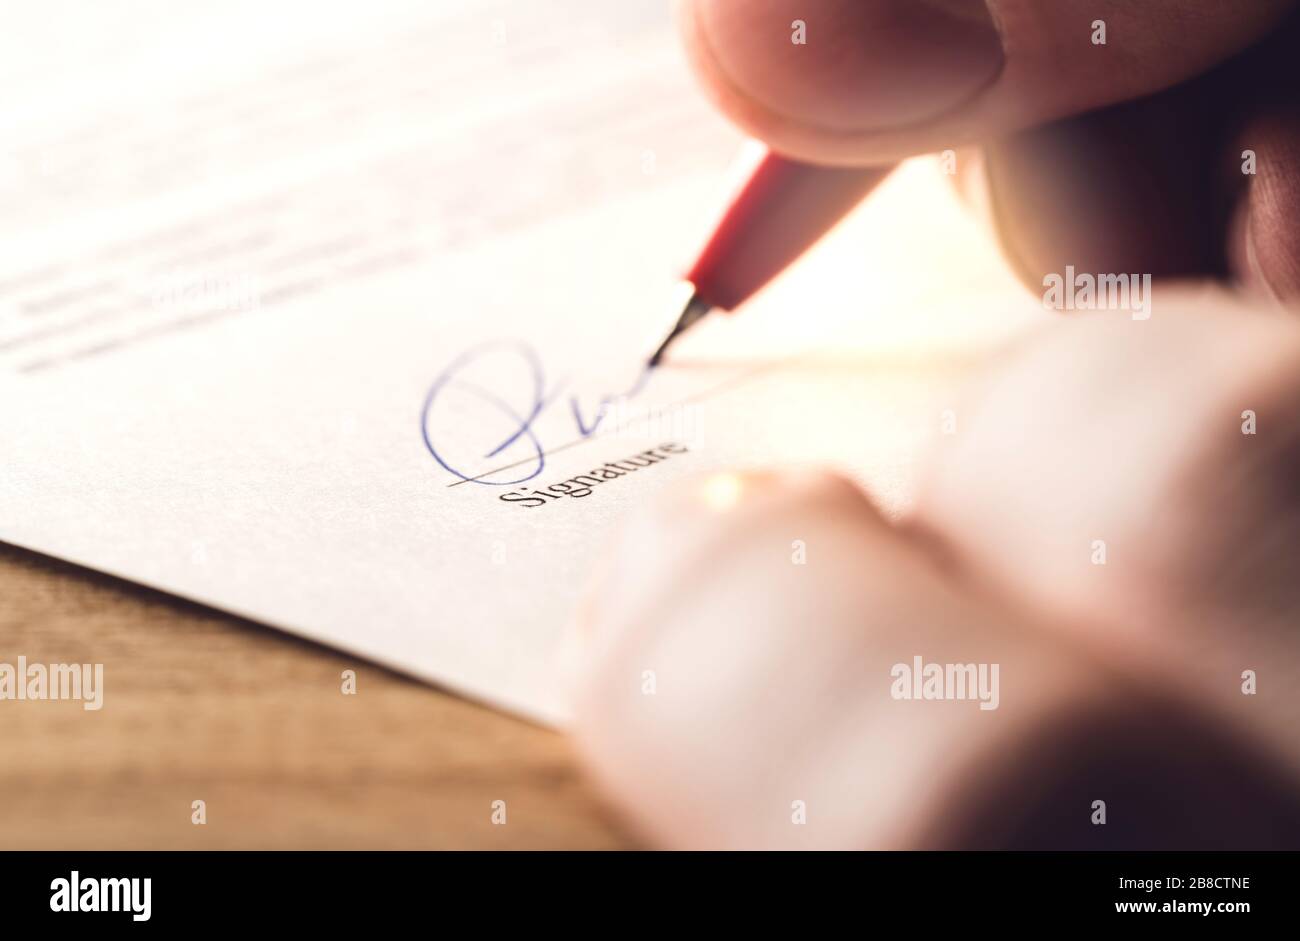 Man writing signature with pen on paper. Settlement for acquisition, business deal, bank loan or rental apartment. Signing contract, agreement. Stock Photo